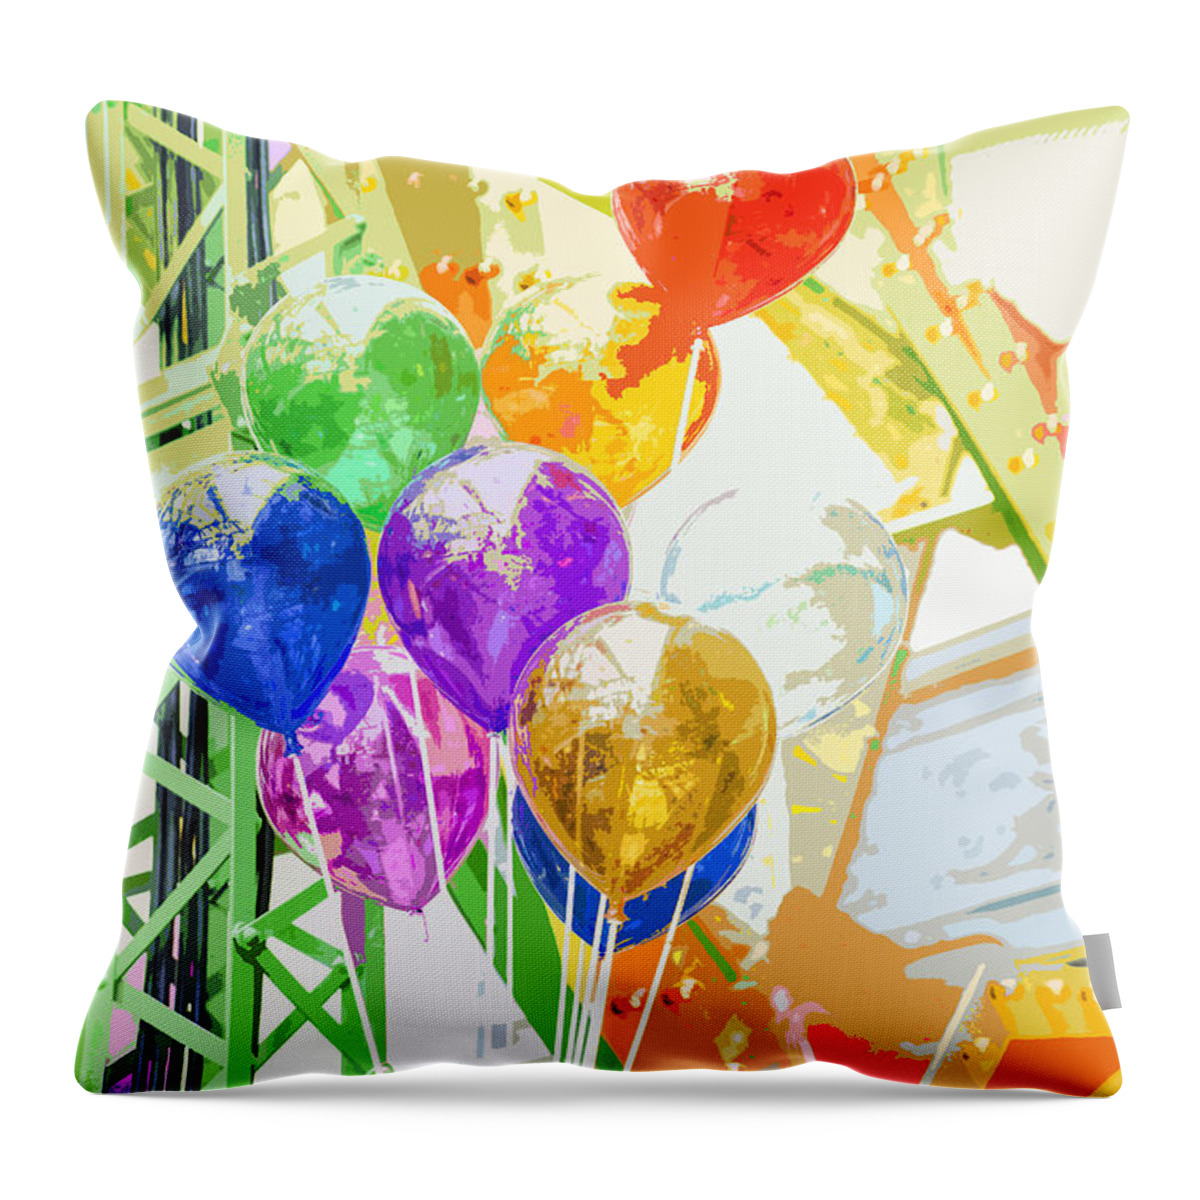 Balloons Throw Pillow featuring the photograph Colored Balloons by Susan Stone